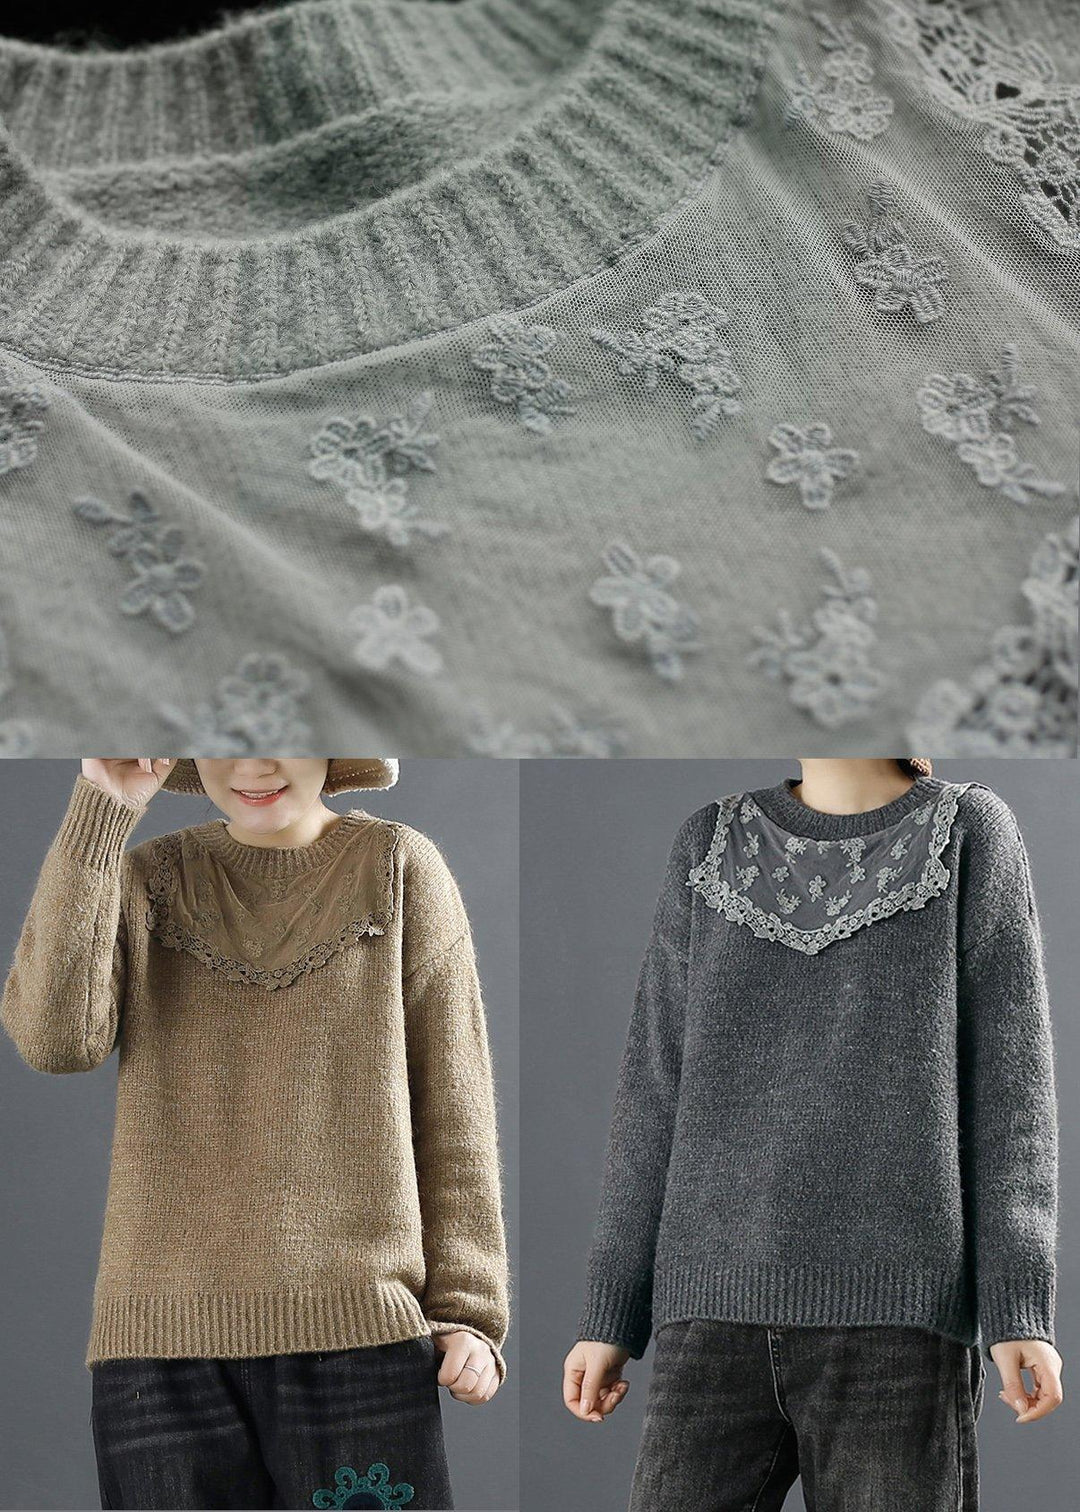 Aesthetic Gray Knit Tops Plus Size Clothing Lace Knit Tops - Omychic